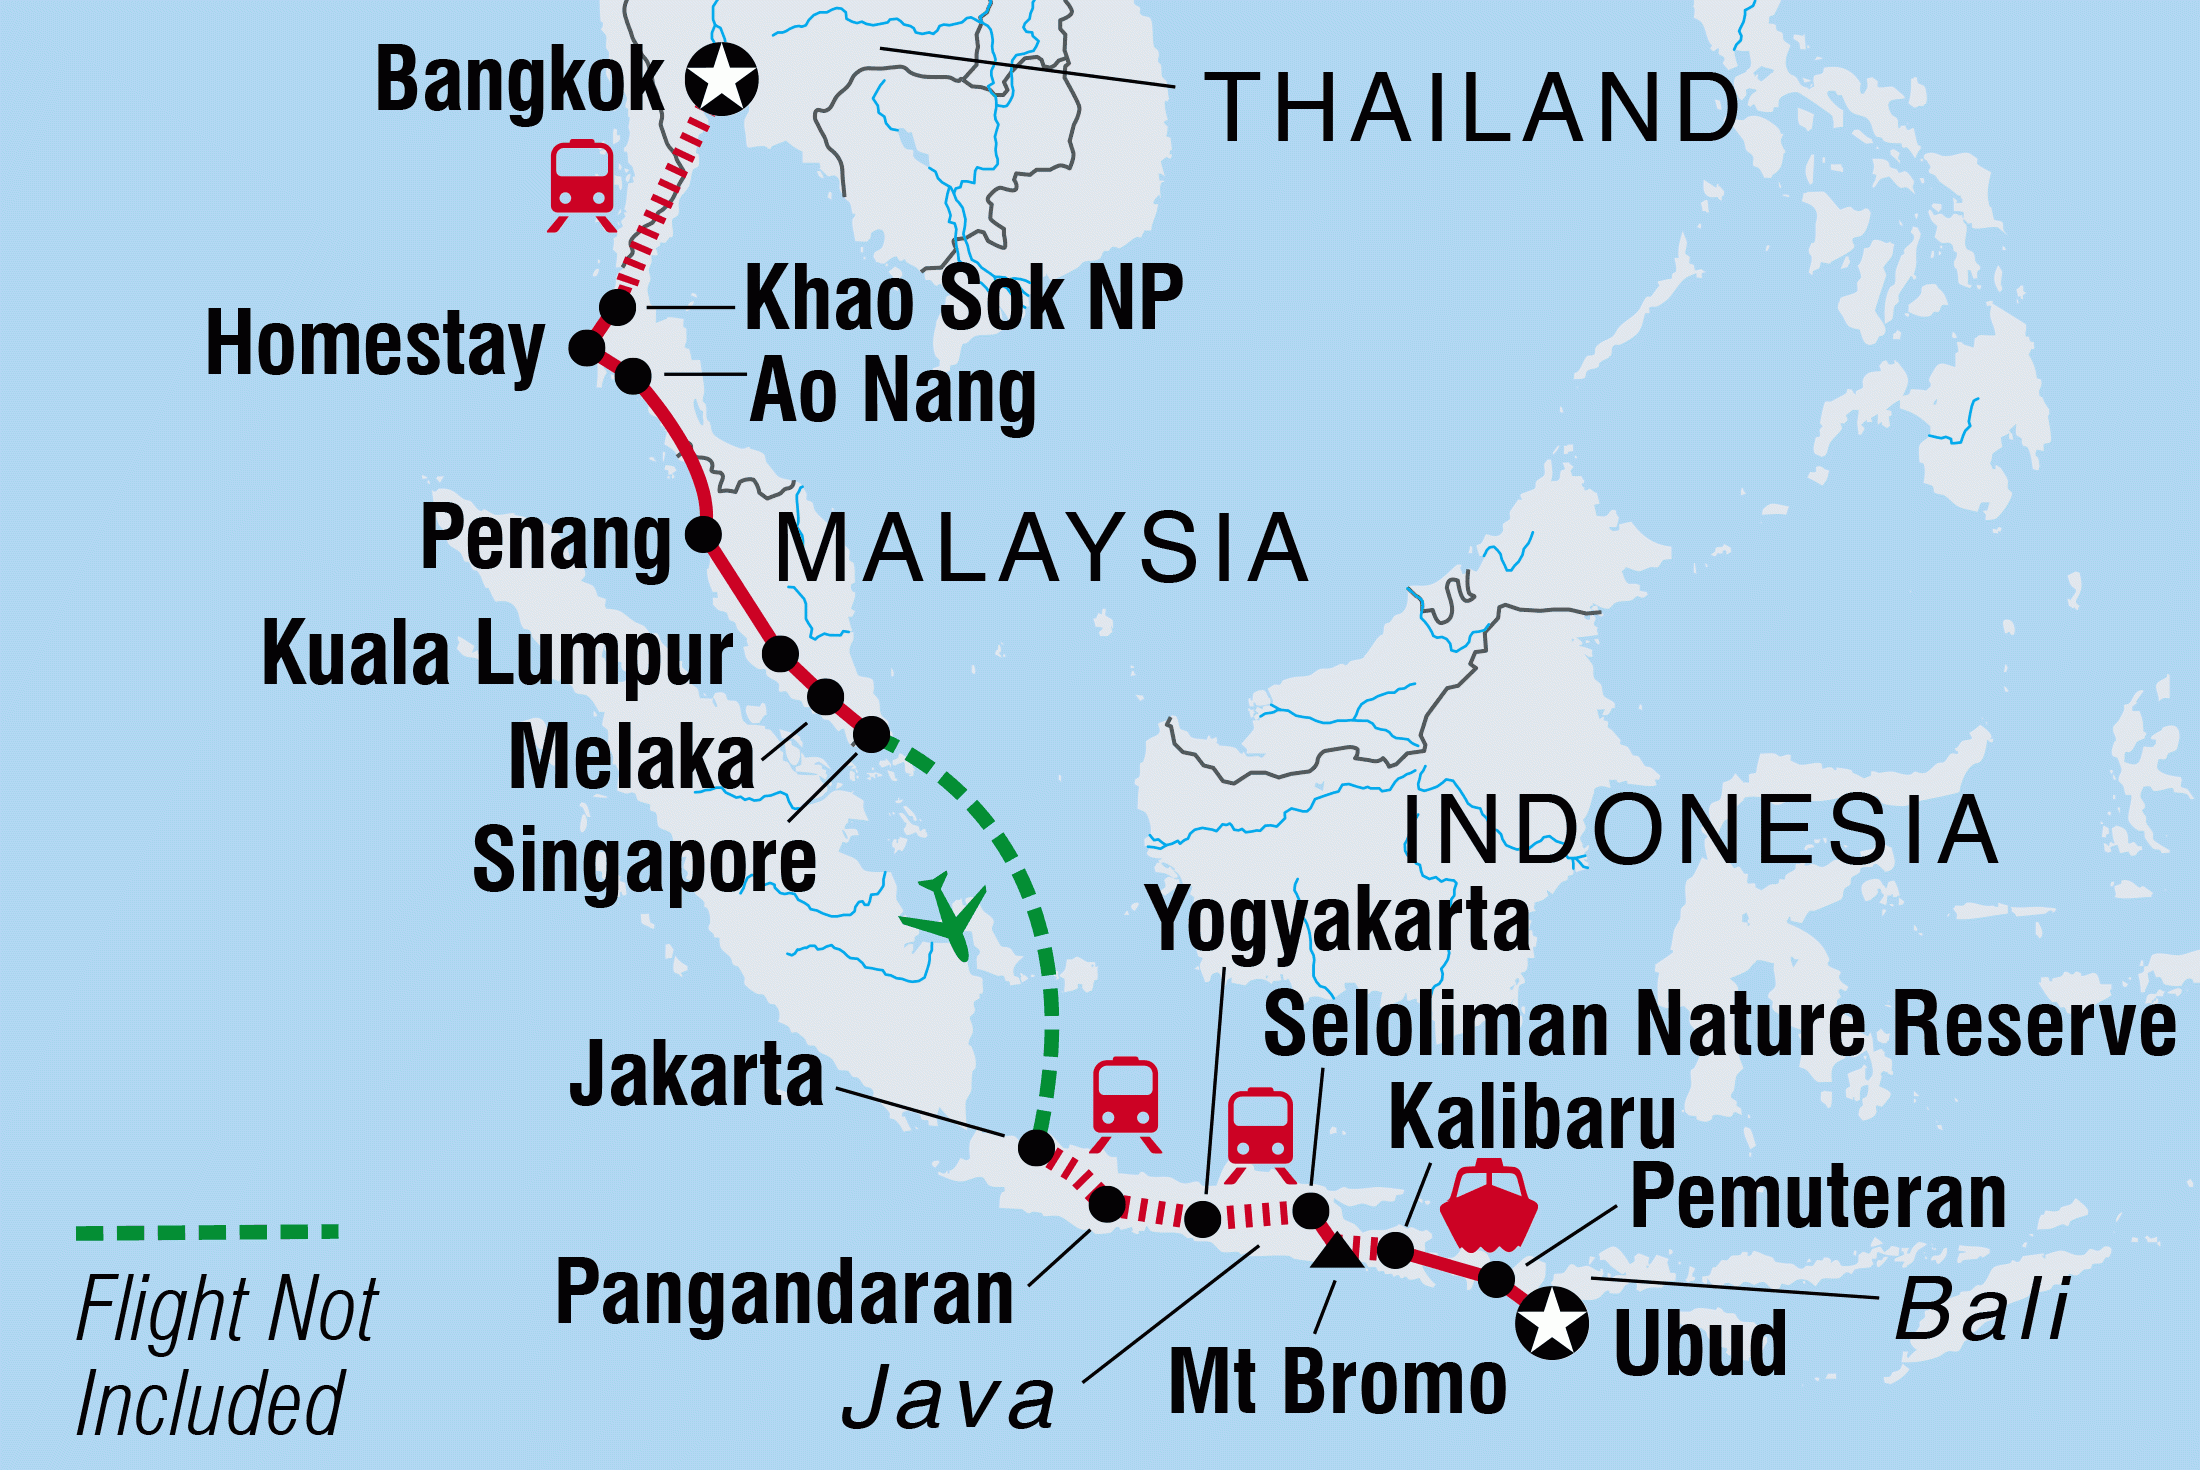 travel to indonesia or thailand